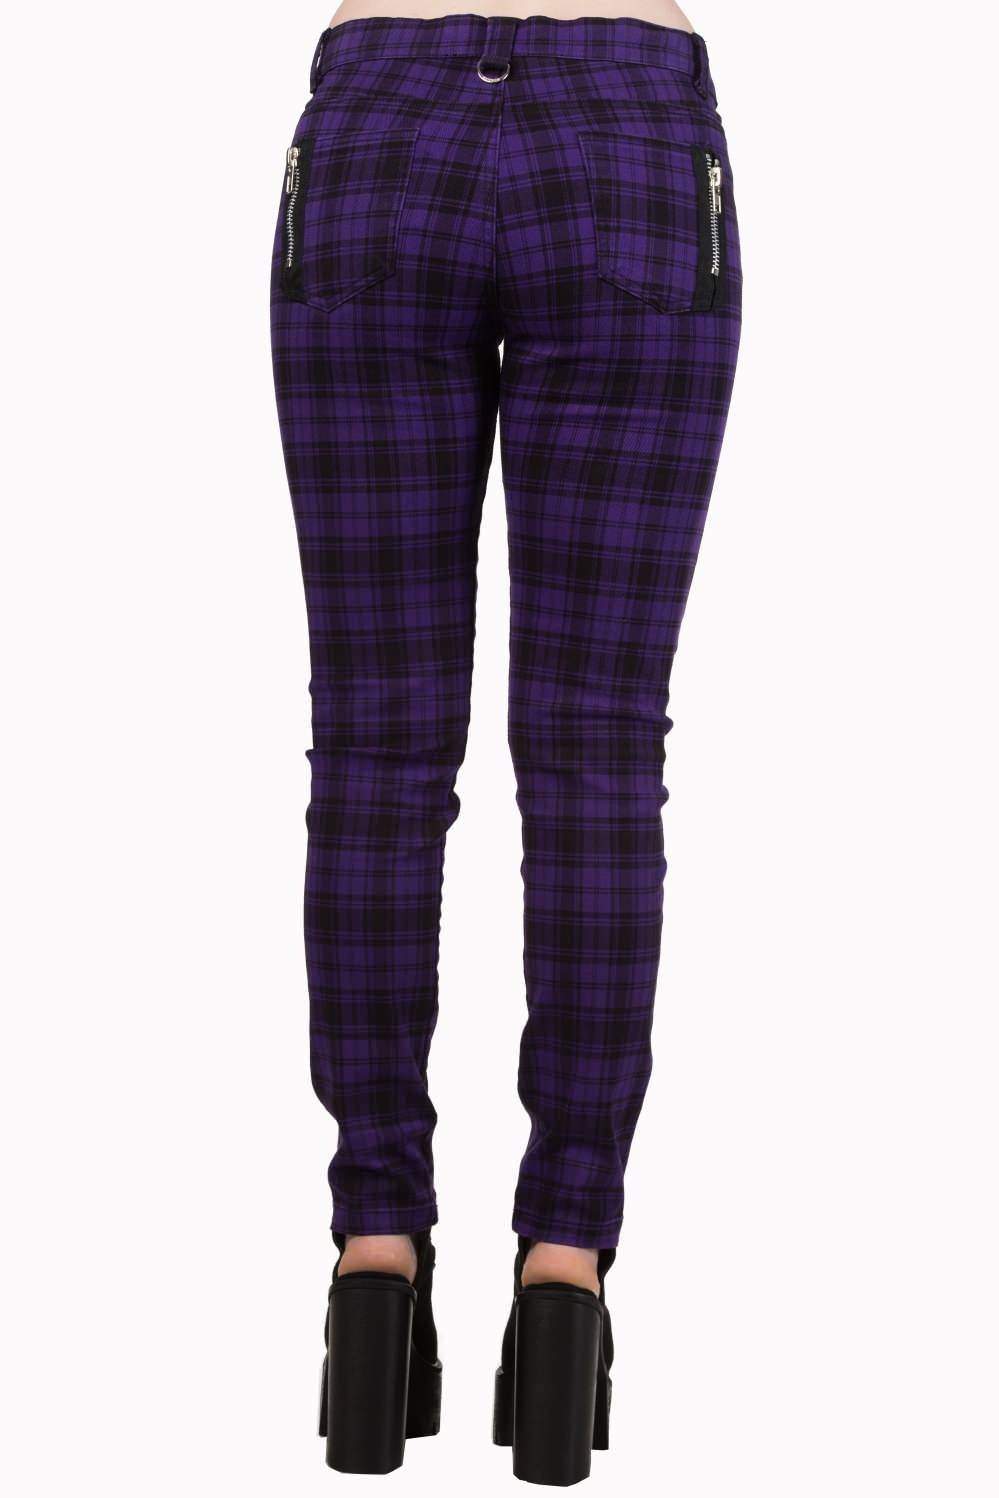 Purple tartan check trousers low rise with rips. 